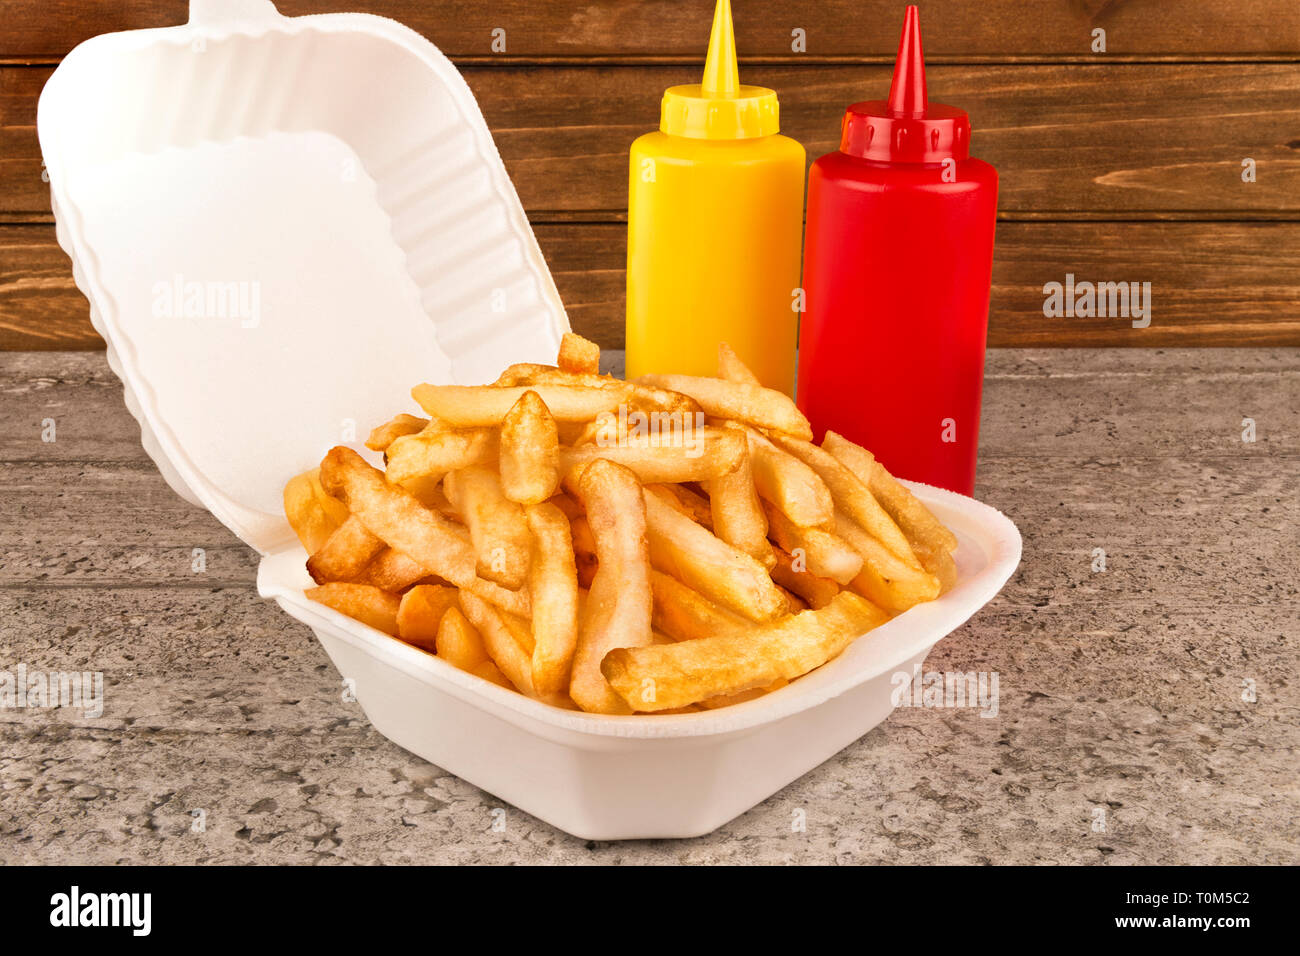 https://c8.alamy.com/comp/T0M5C2/french-fries-in-takeout-container-ketchup-and-mustard-bottle-on-the-side-close-up-T0M5C2.jpg